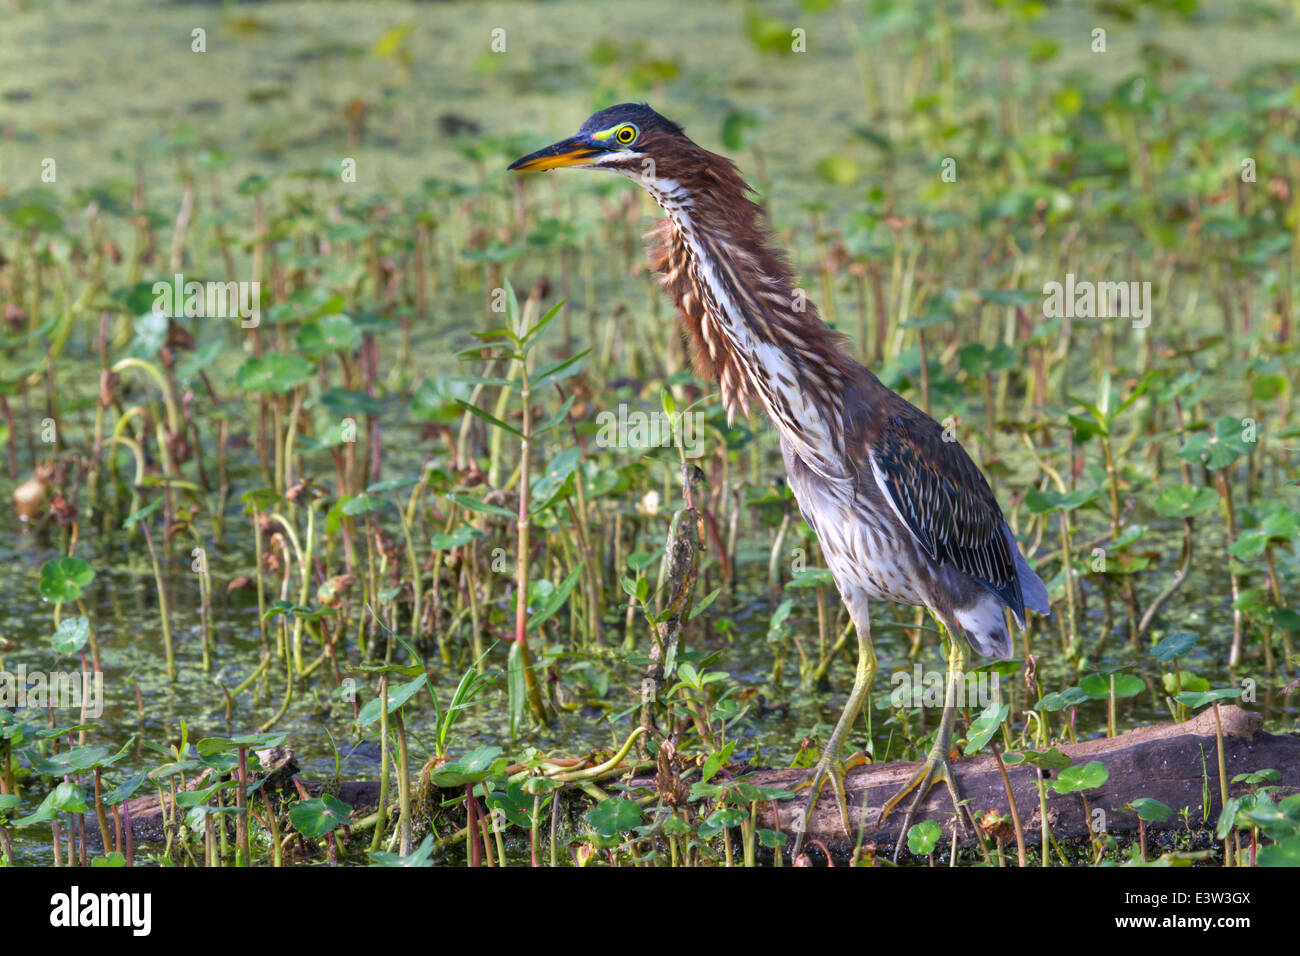 Green heron (Butorides virescens) demonstrating defensive 'Forward' display against another heron entering the territory. Stock Photo